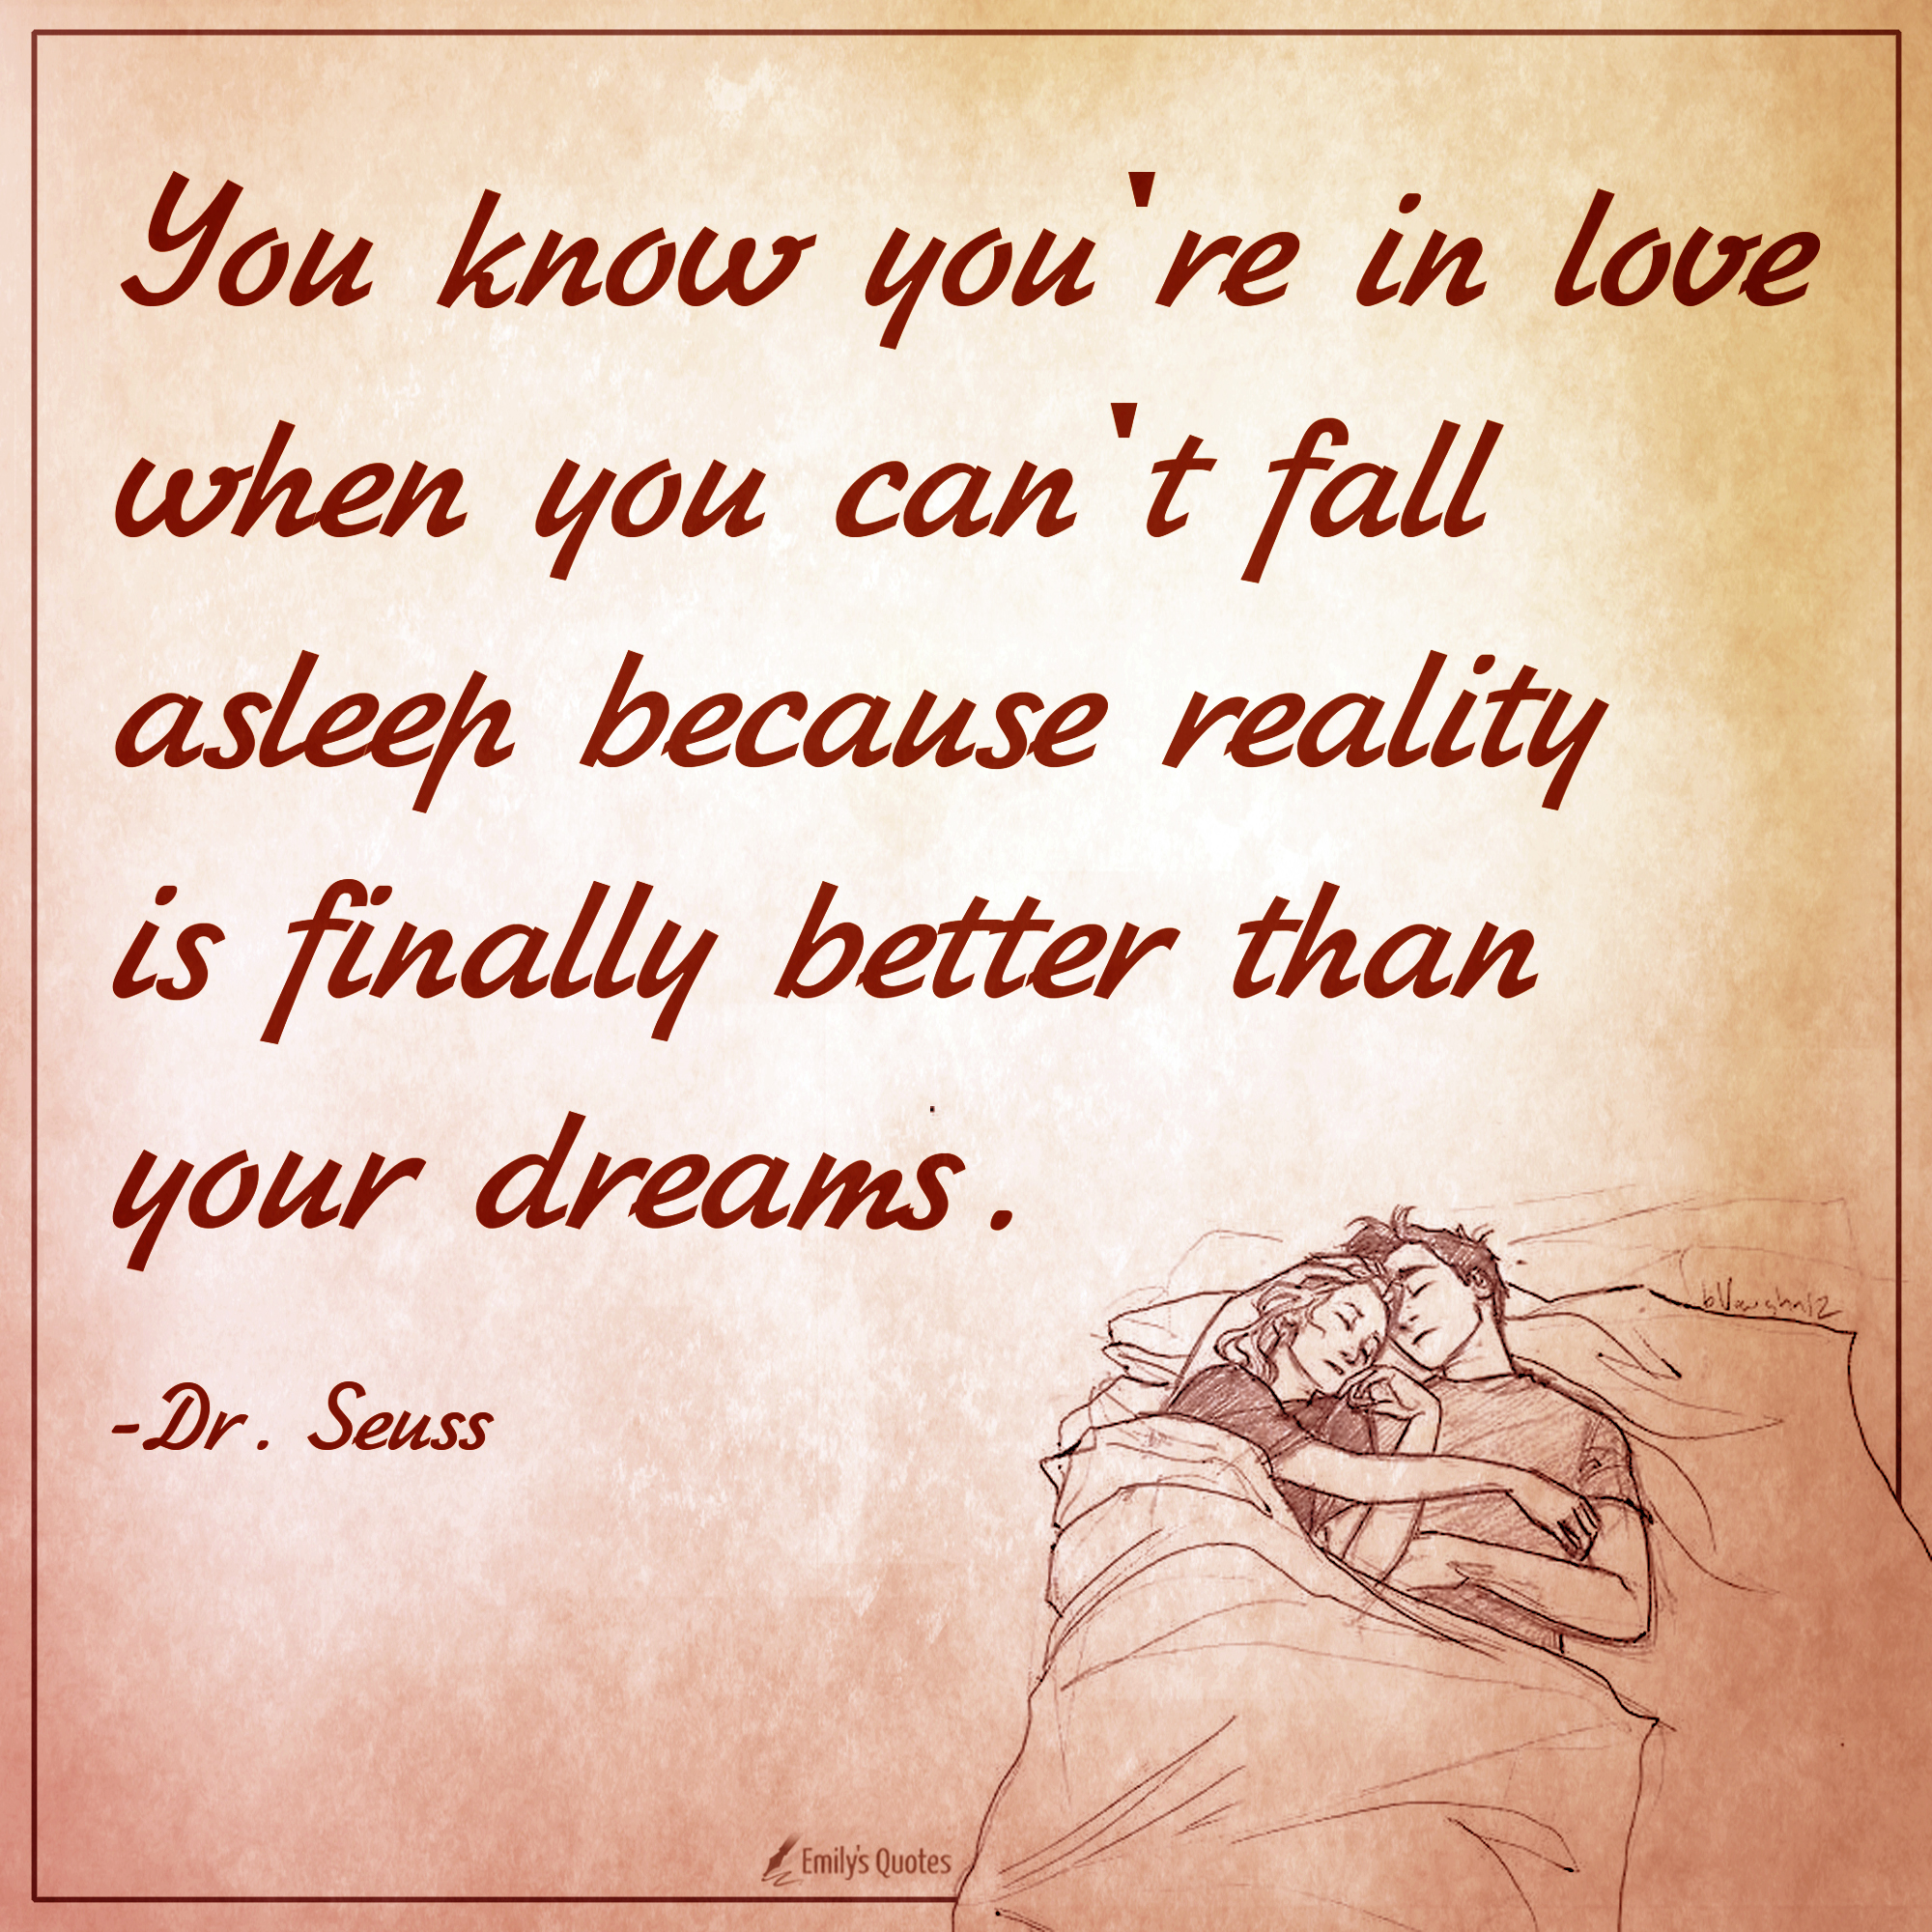 You know you’re in love when you can’t fall asleep because reality is